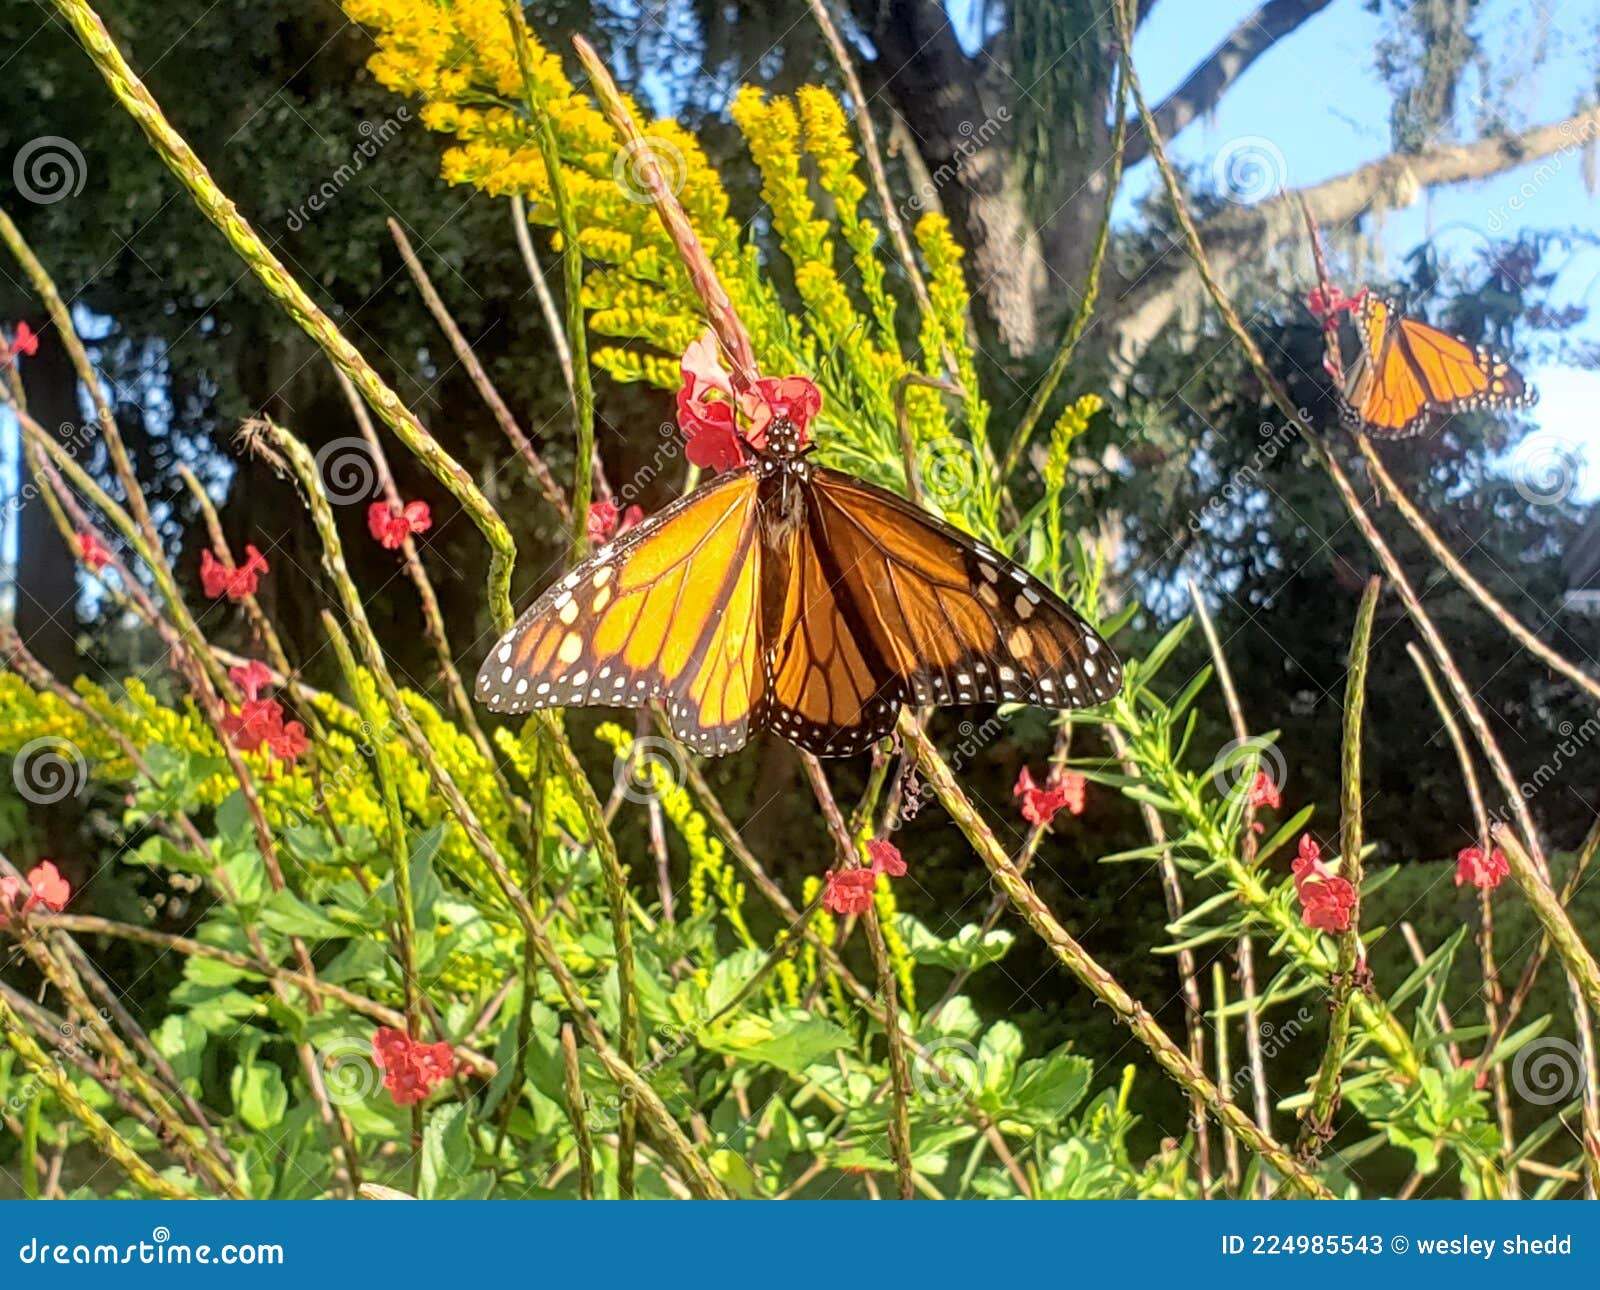 a hungry monarch feasts on nectar